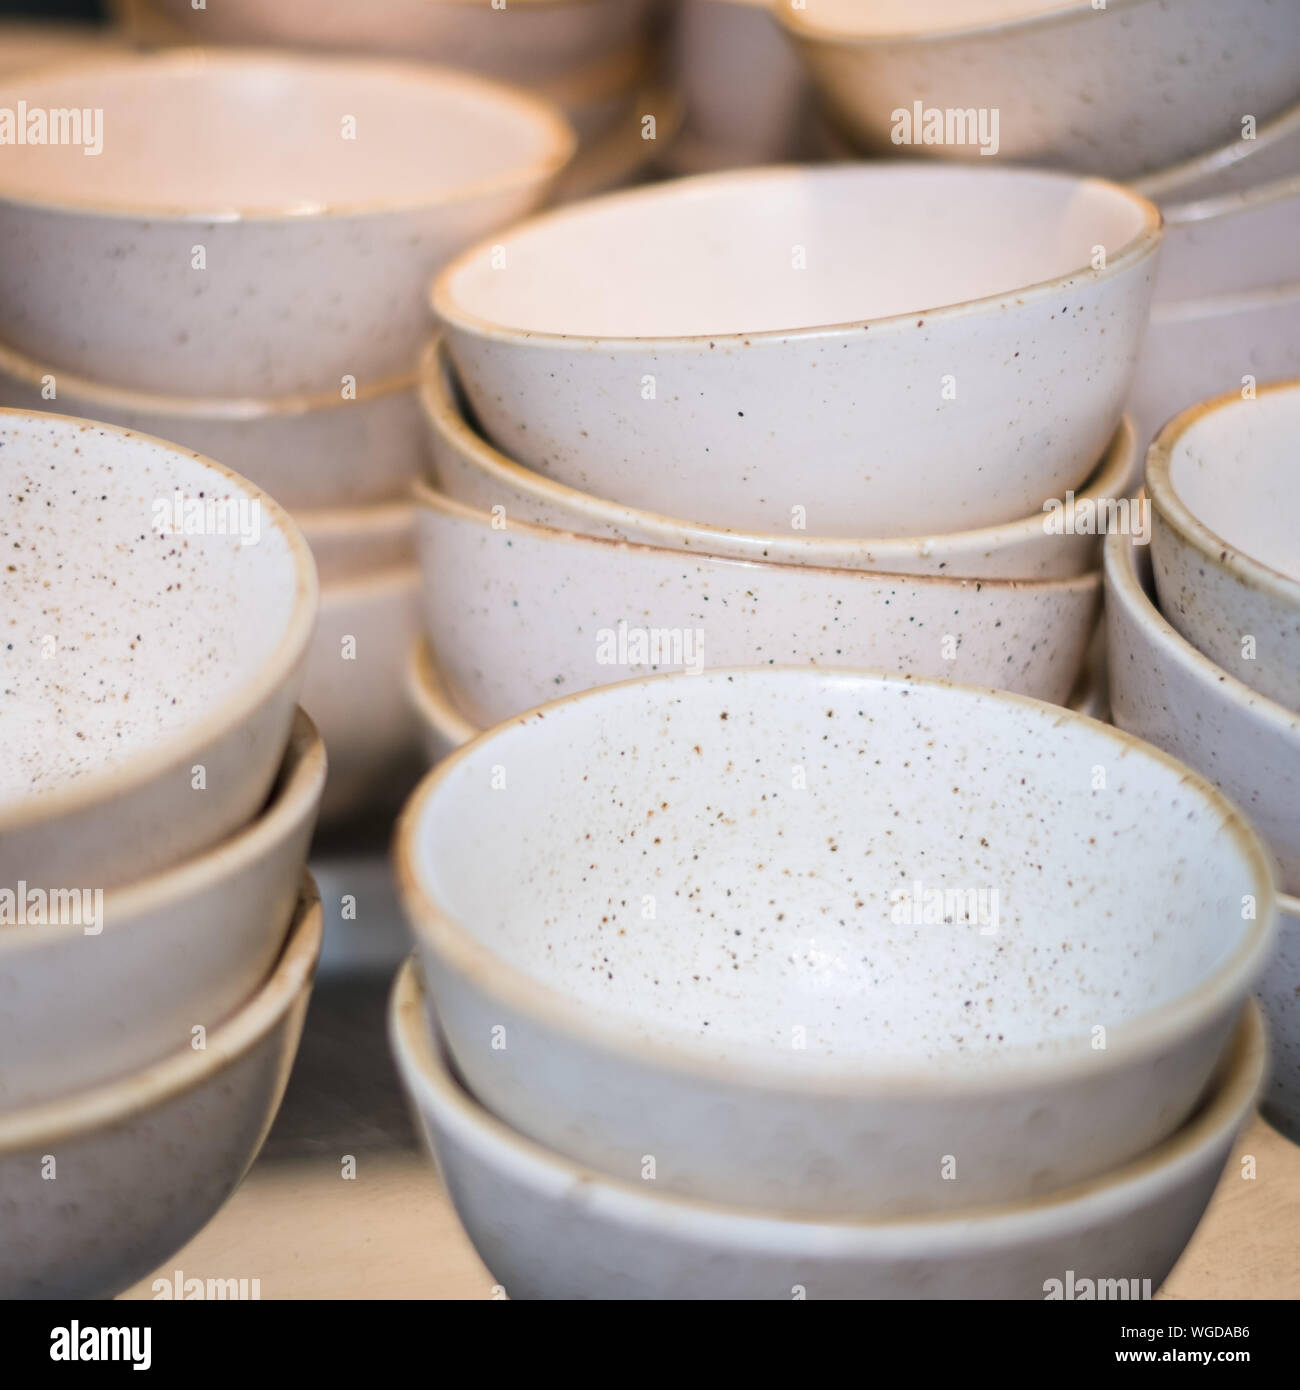 Close-up Of Bowls On Table Stock Photo